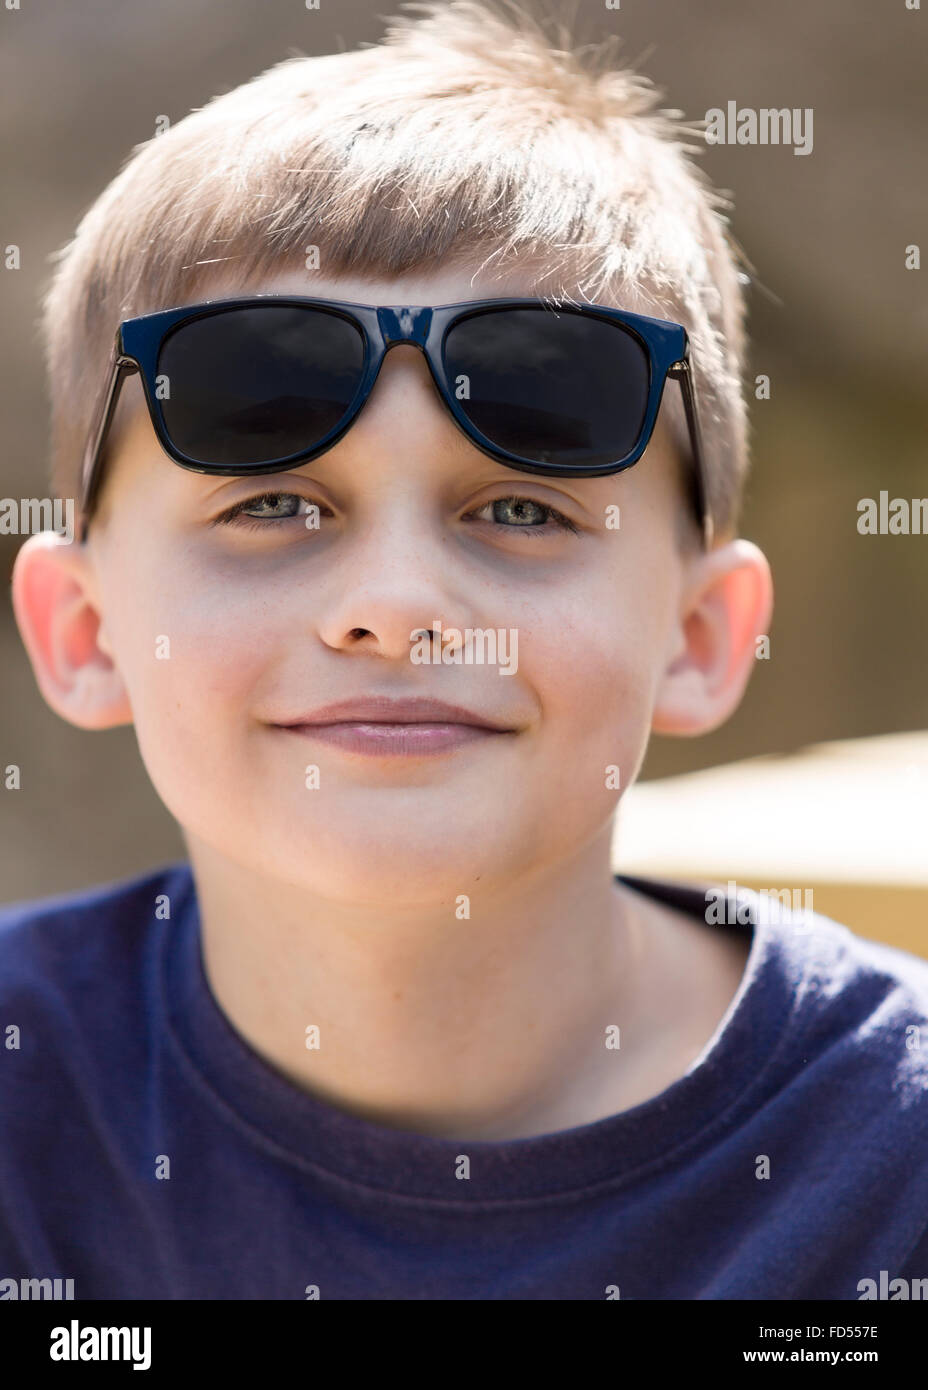 Young boy wearing sunglasses outdoor portrait  Model Release: Yes.  Property Release: No. Stock Photo